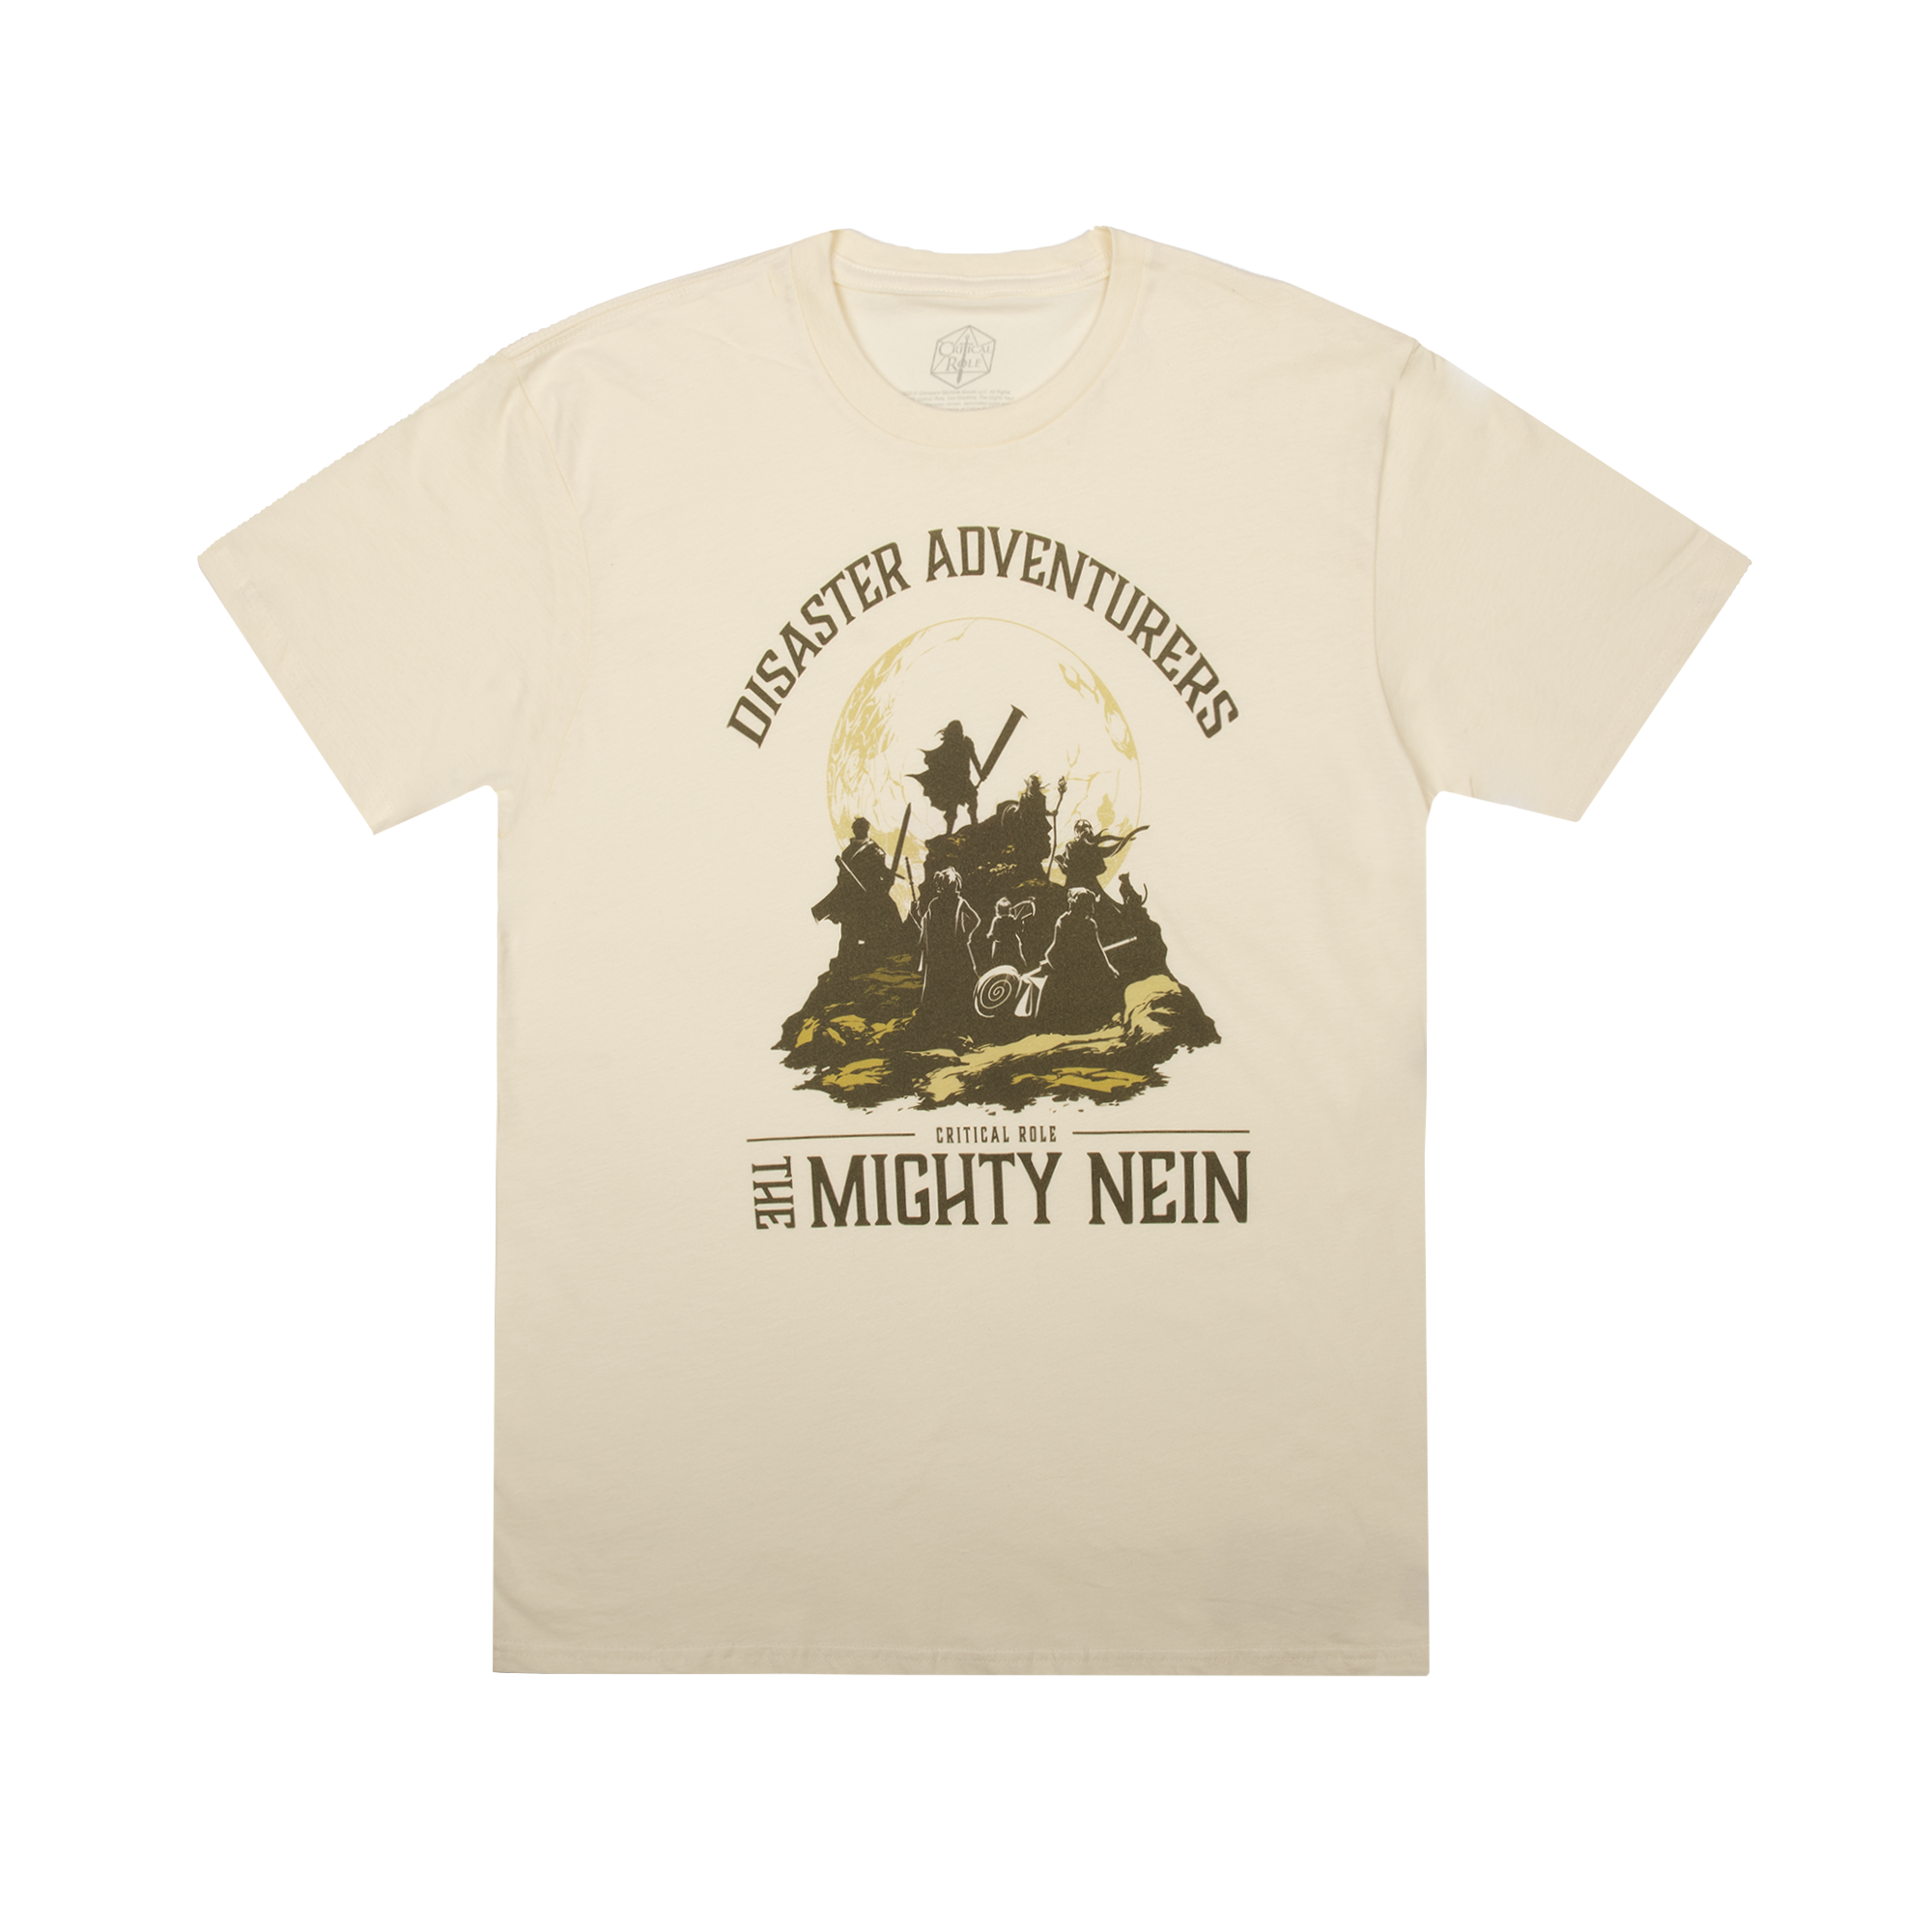 Mighty Nein Disaster Adventurers Natural Tee